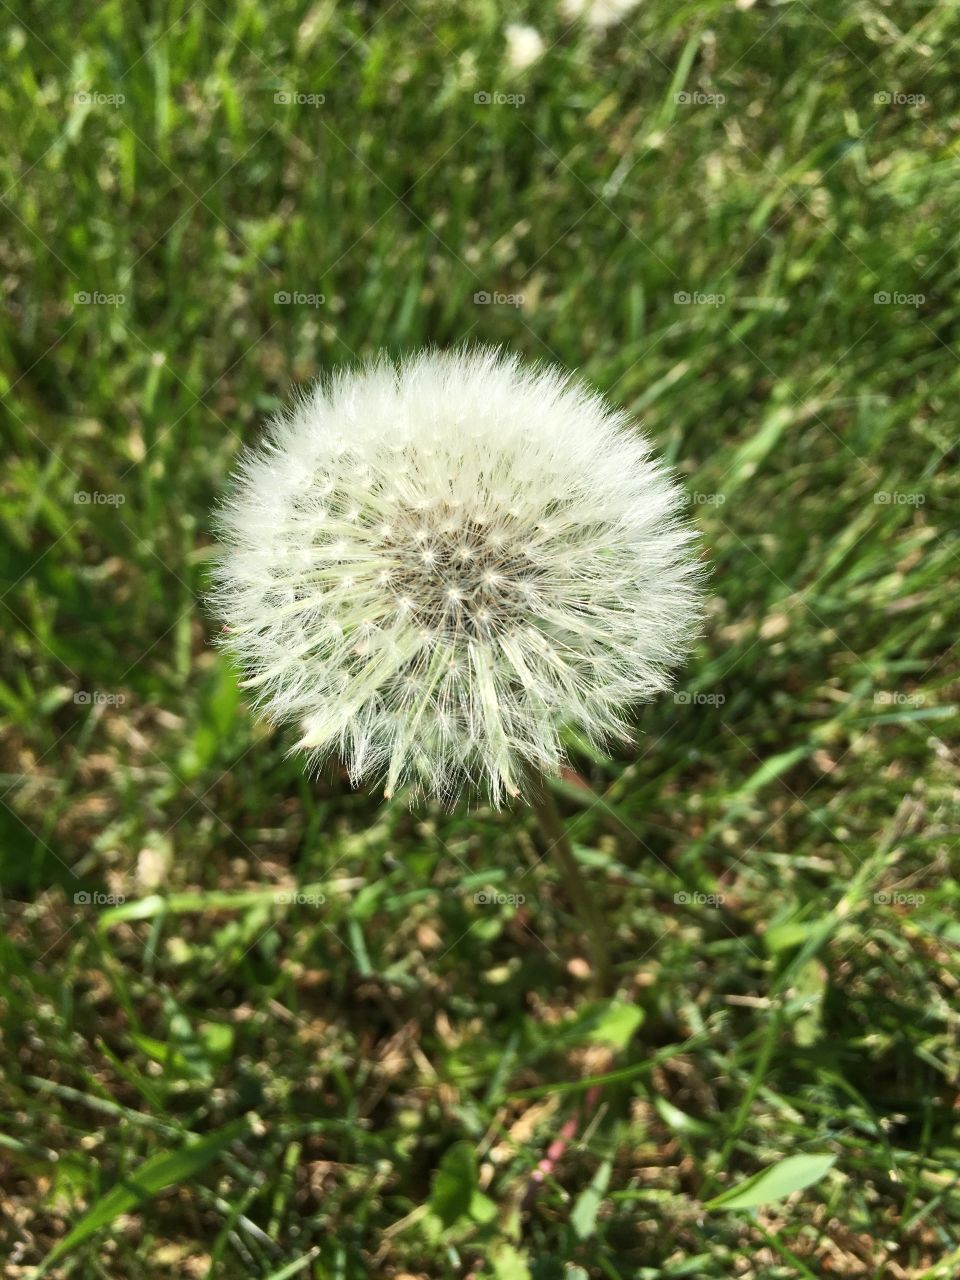 Dandelion gone to seed 